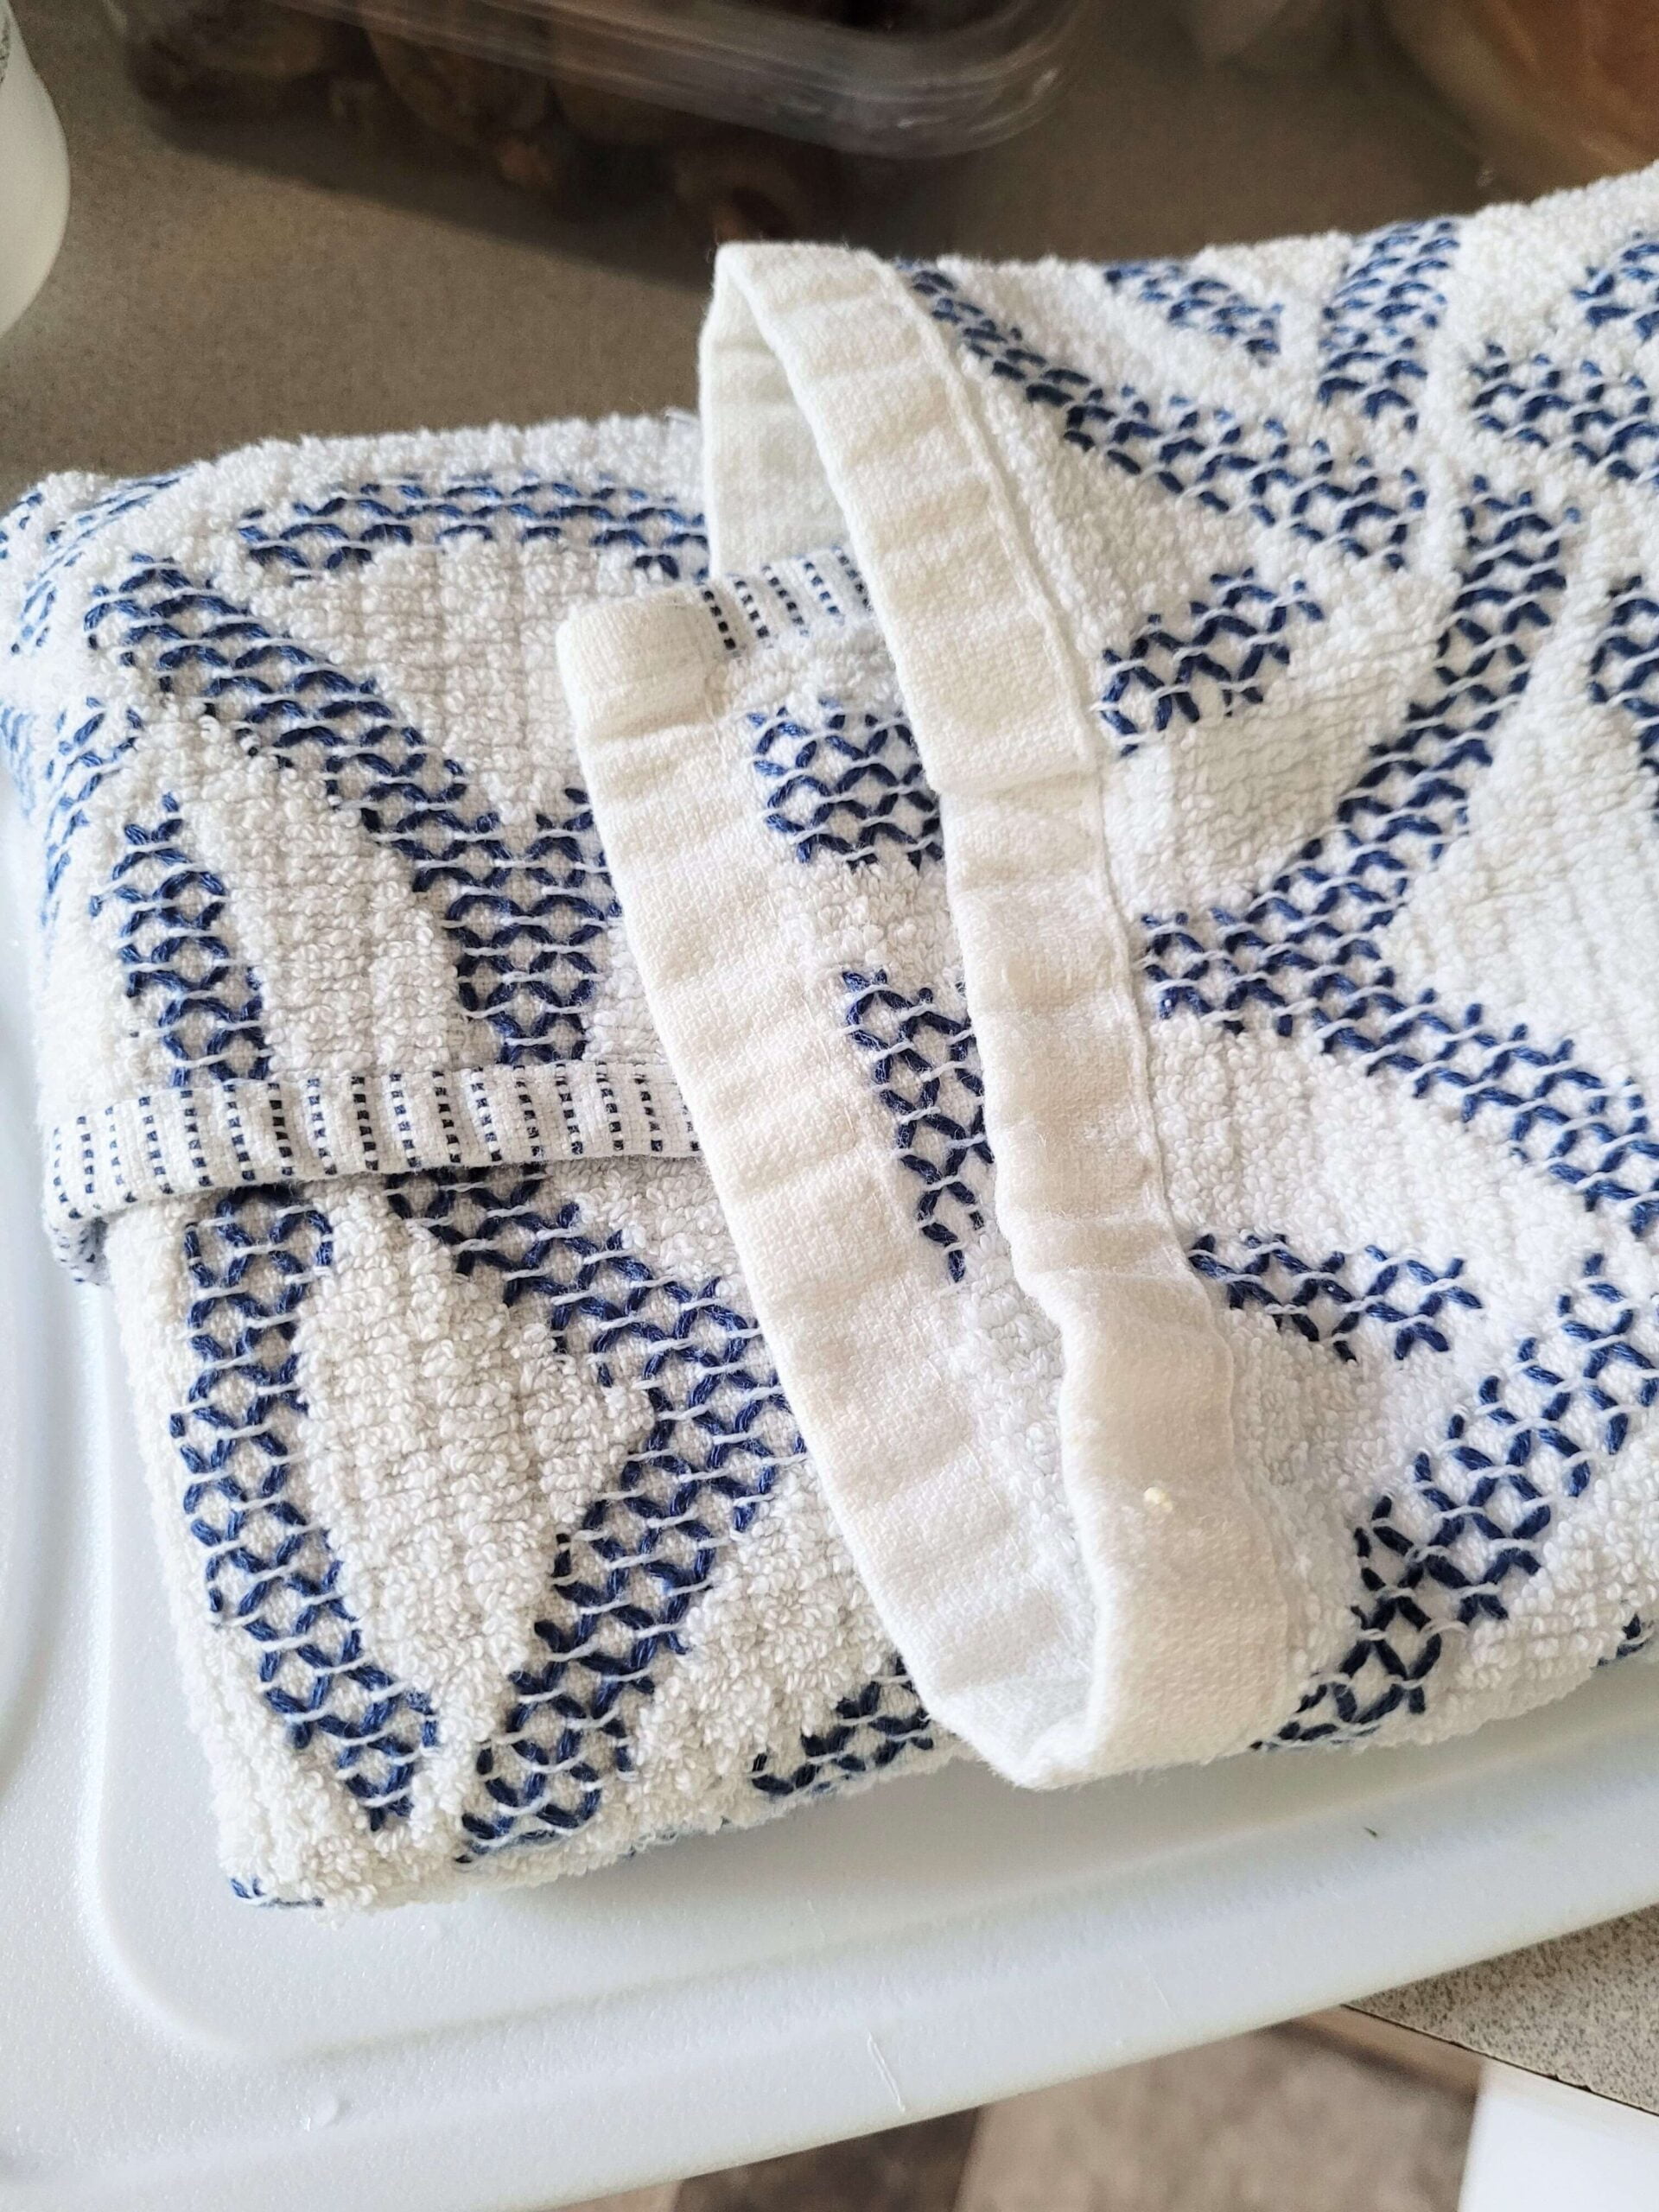 Tofu wrapped in a white and blue towel on a white cutting board.